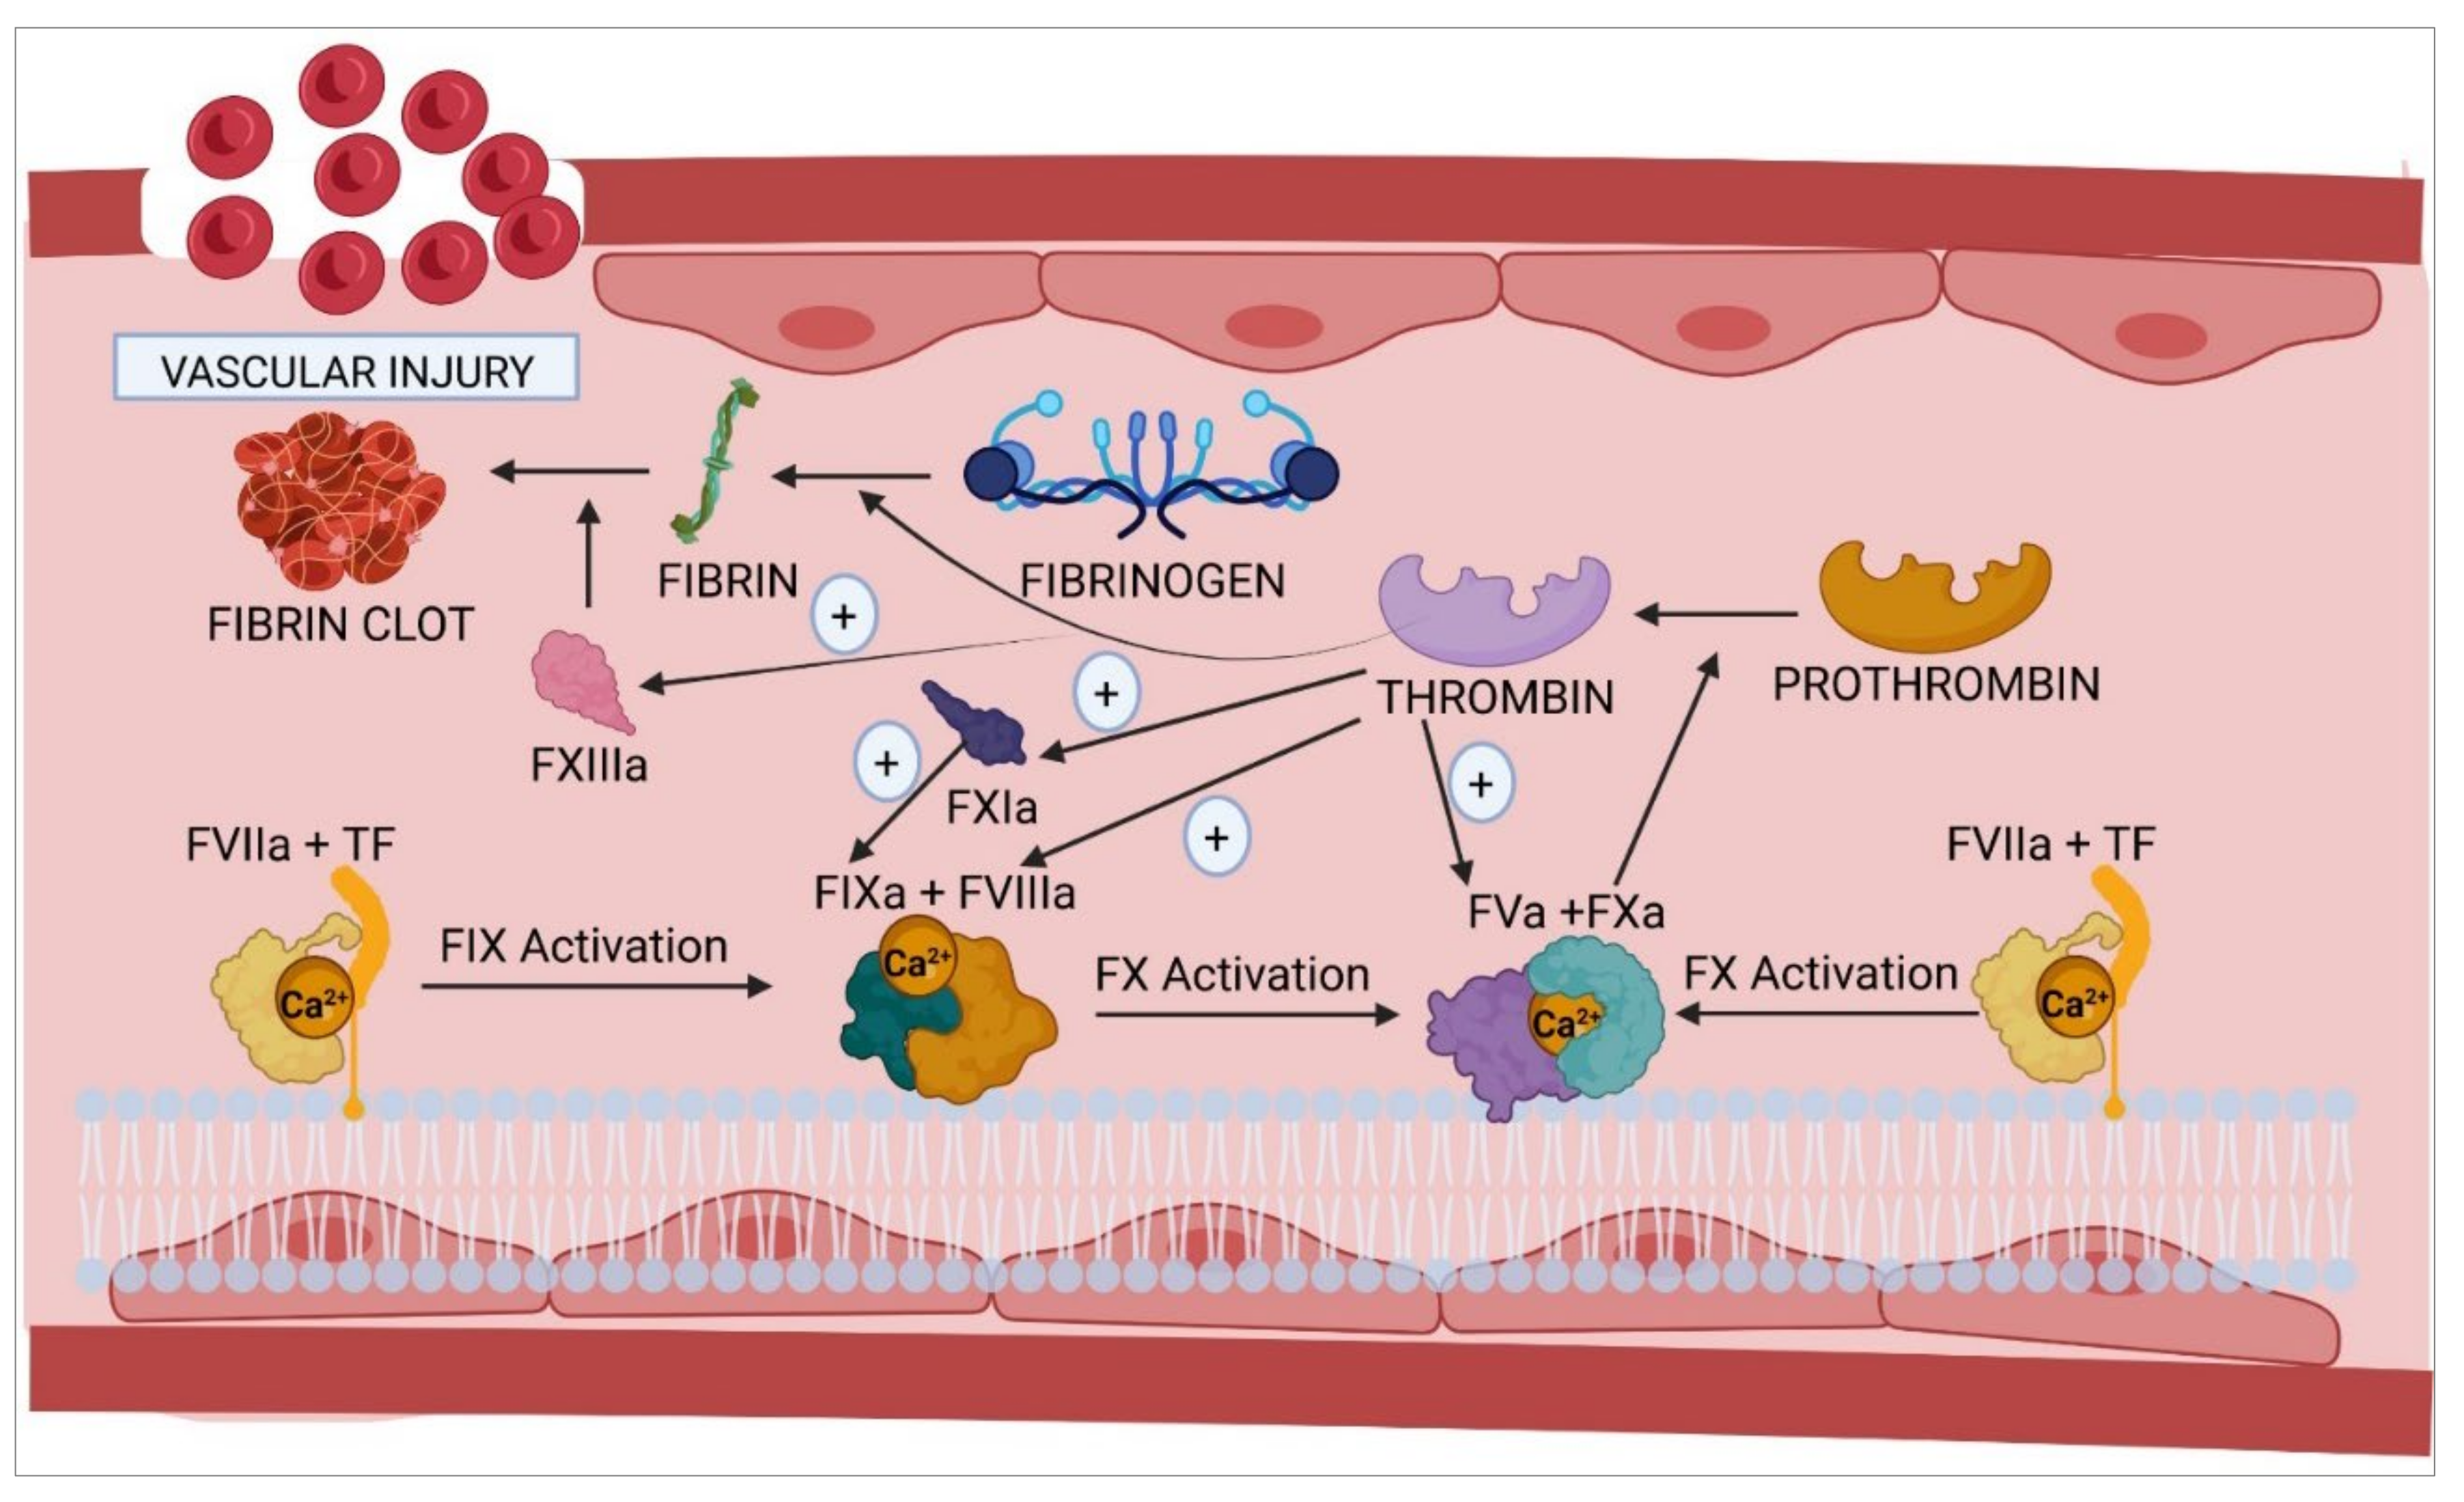 IJMS Free Full-Text The Vascular Endothelium and Coagulation Homeostasis, Disease, and Treatment, with a Focus on the Von Willebrand Factor and Factors VIII and V